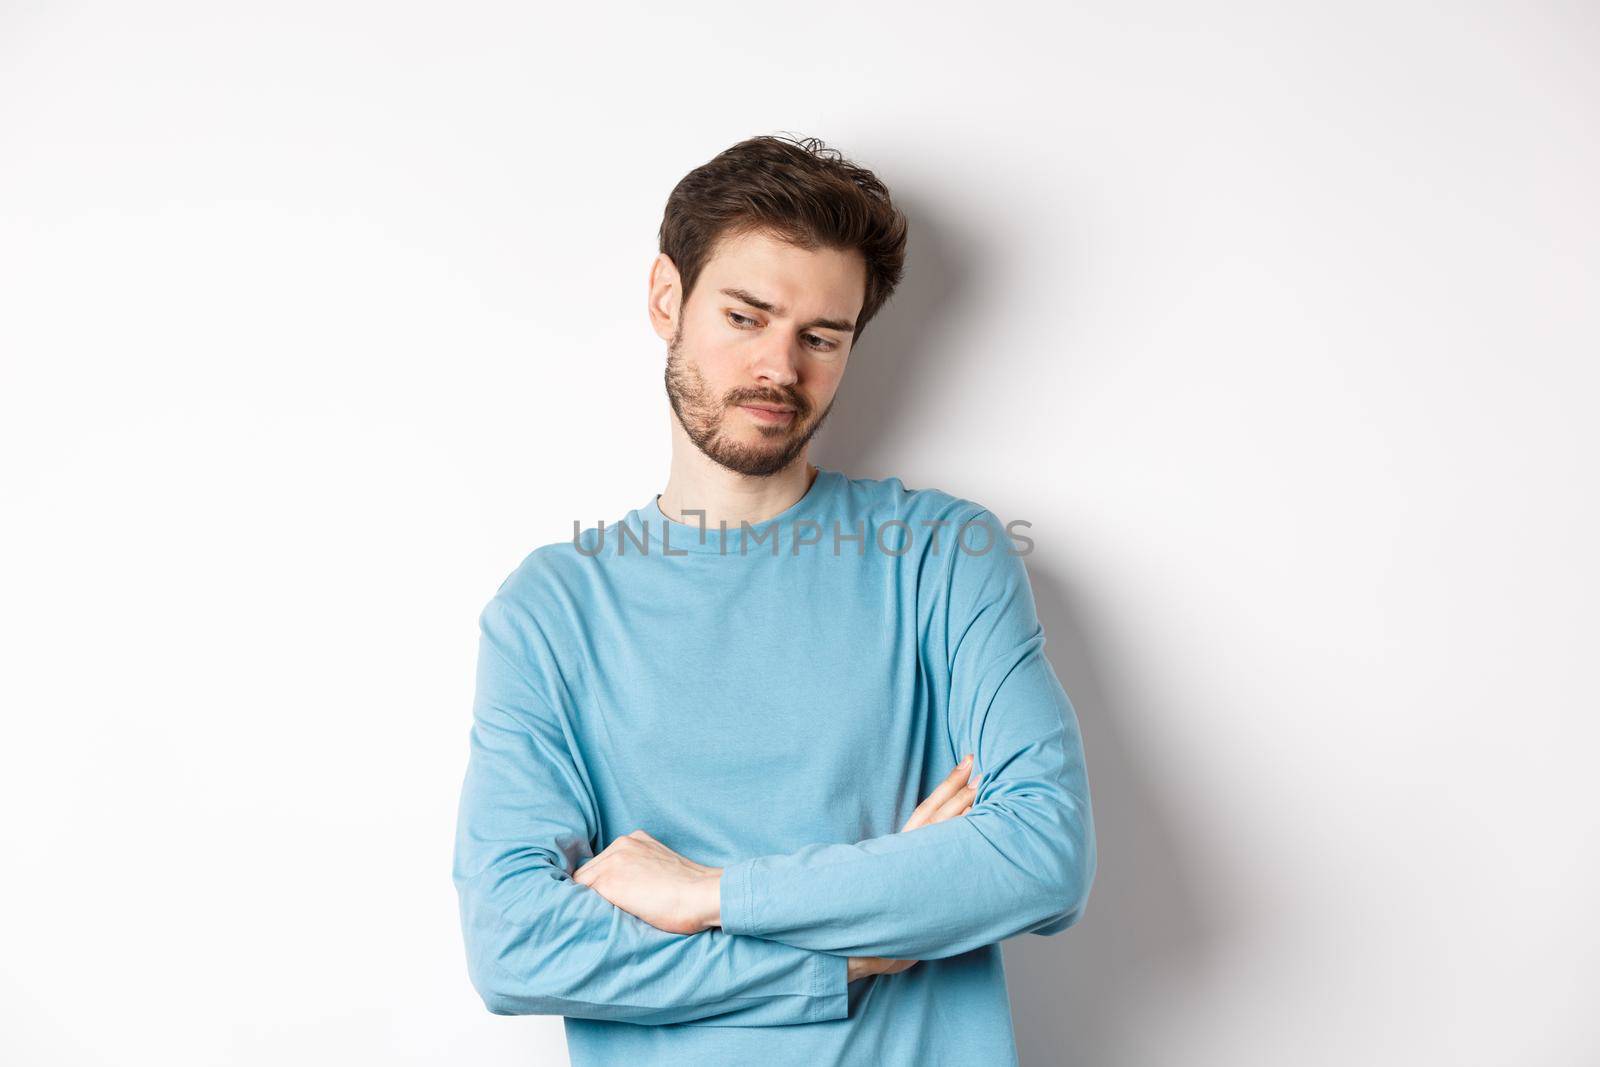 Indecisive and thoughtful bearded man thinking, looking down pensive and making choice, standing over white background.